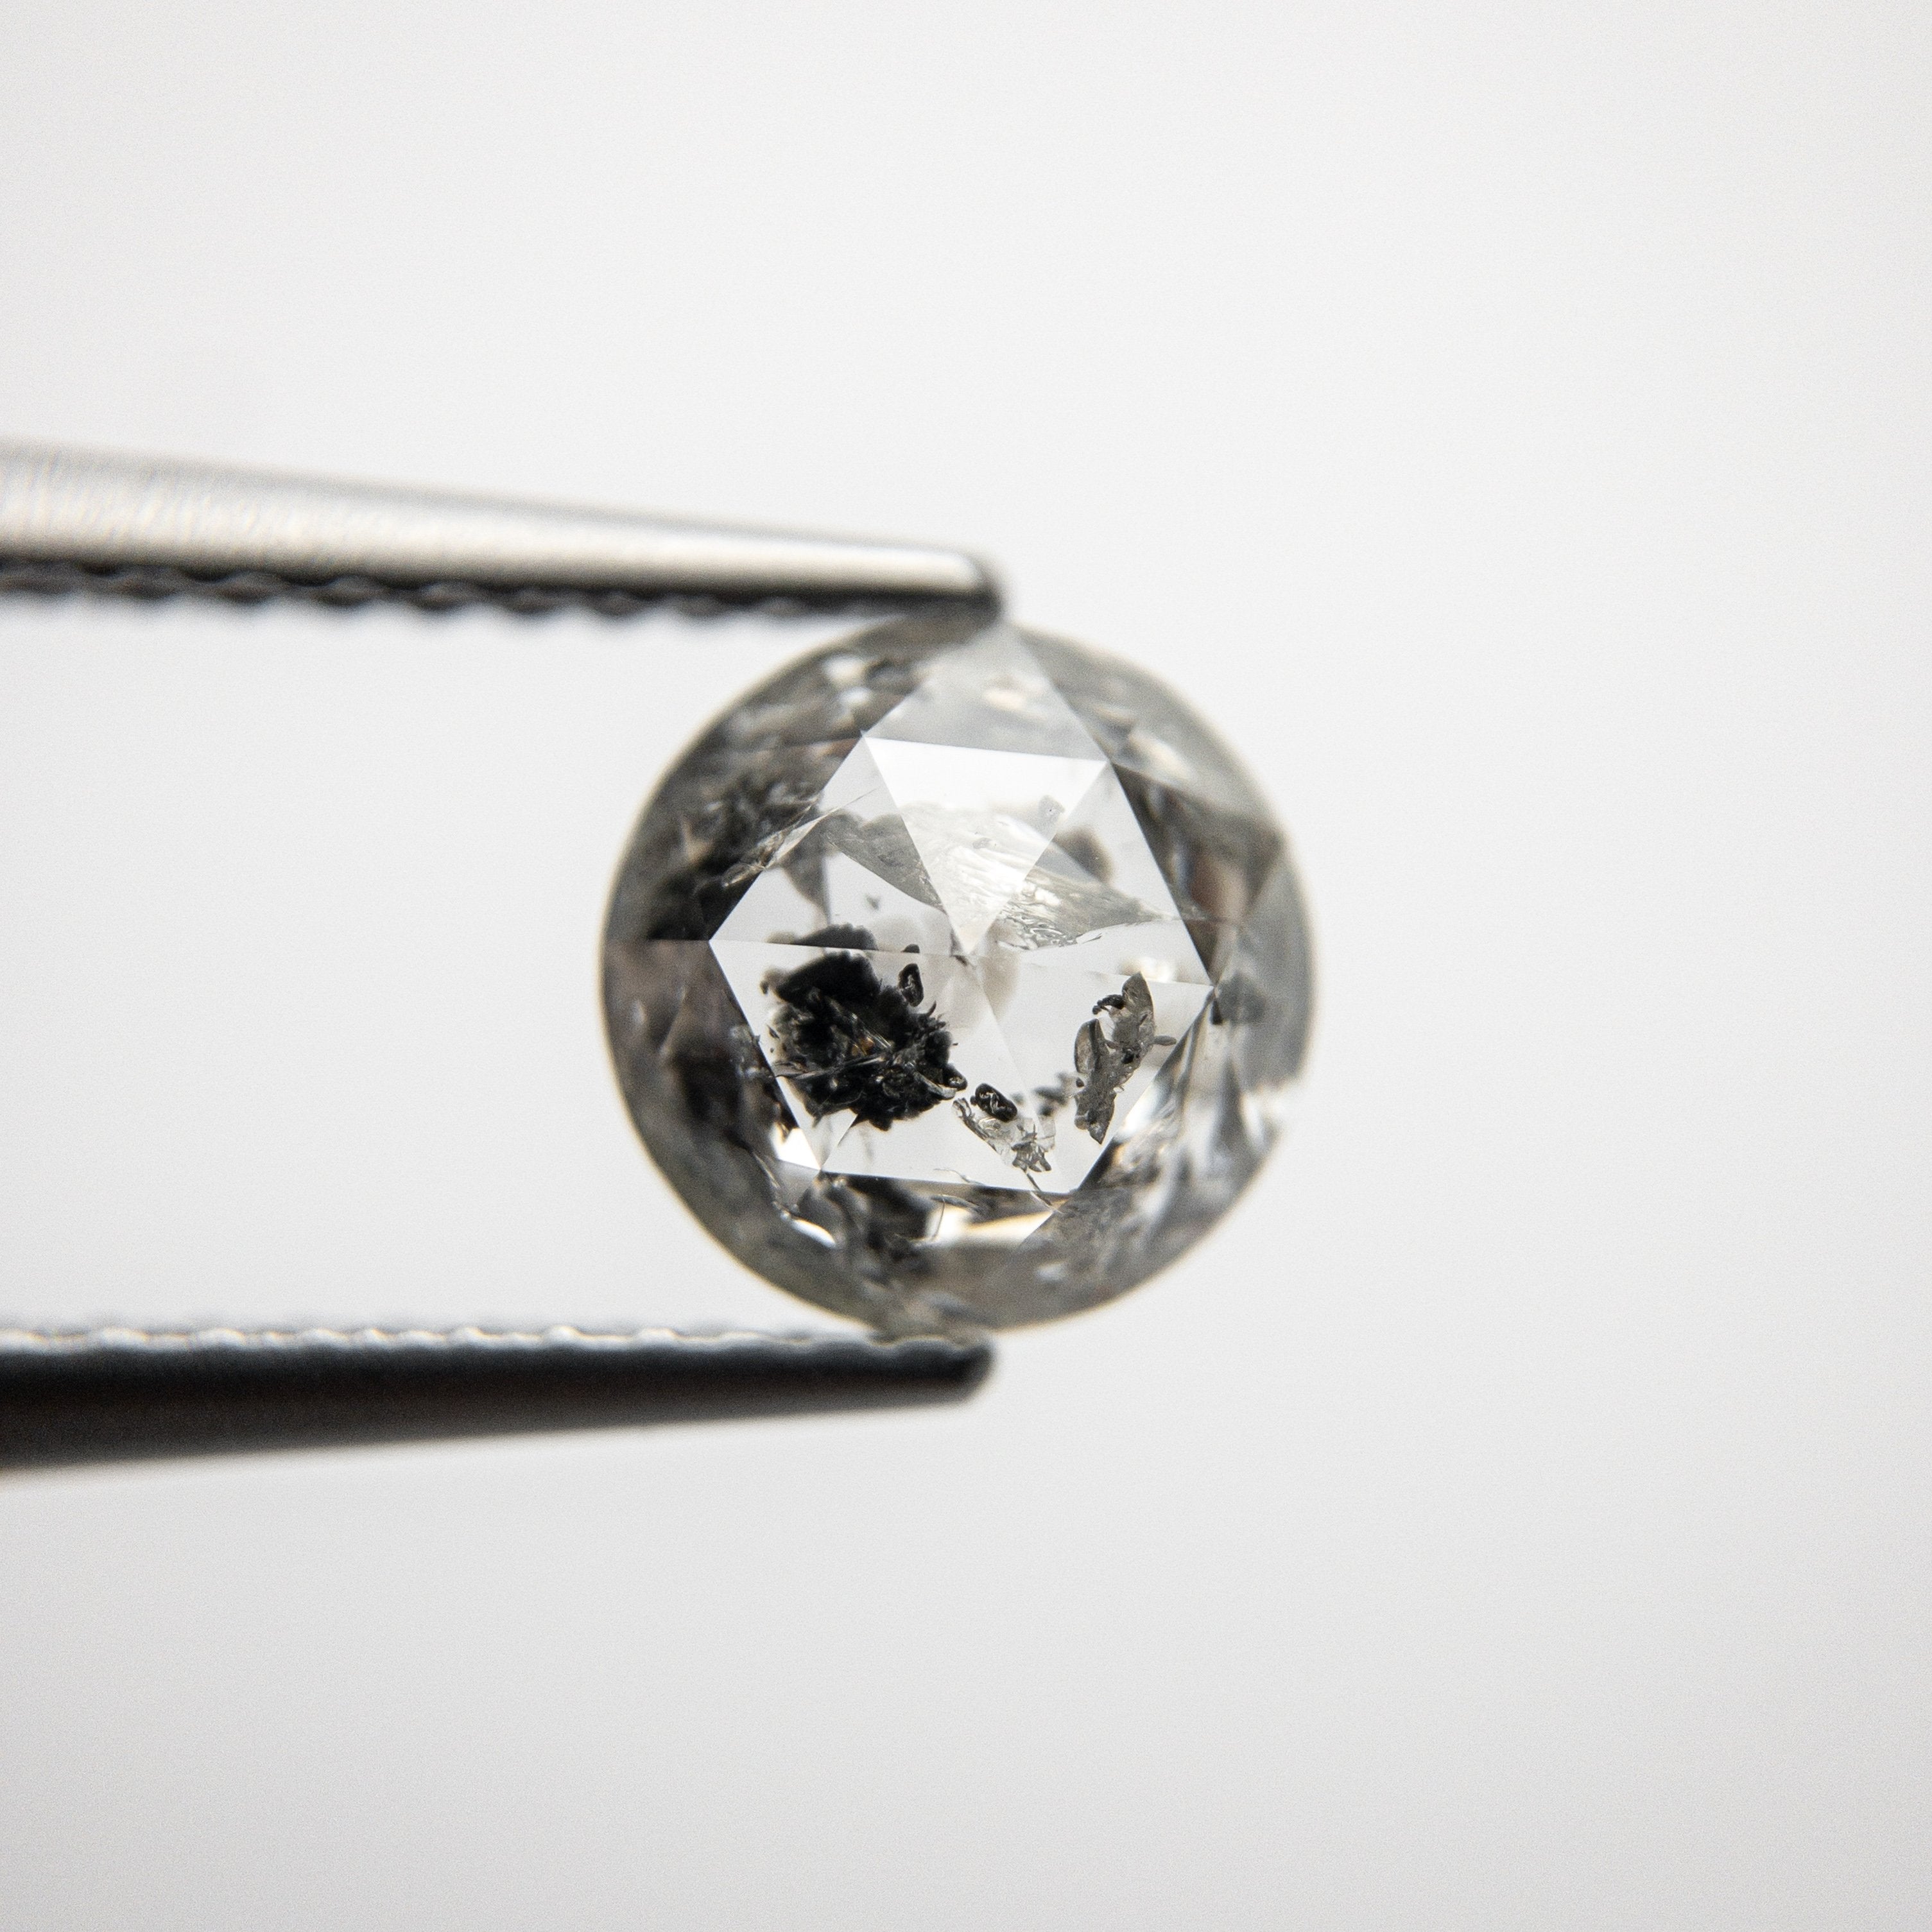 1.35ct 7.04x7.02x3.18mm Round Rosecut 18434-02 HOLD D1942 2.12.21